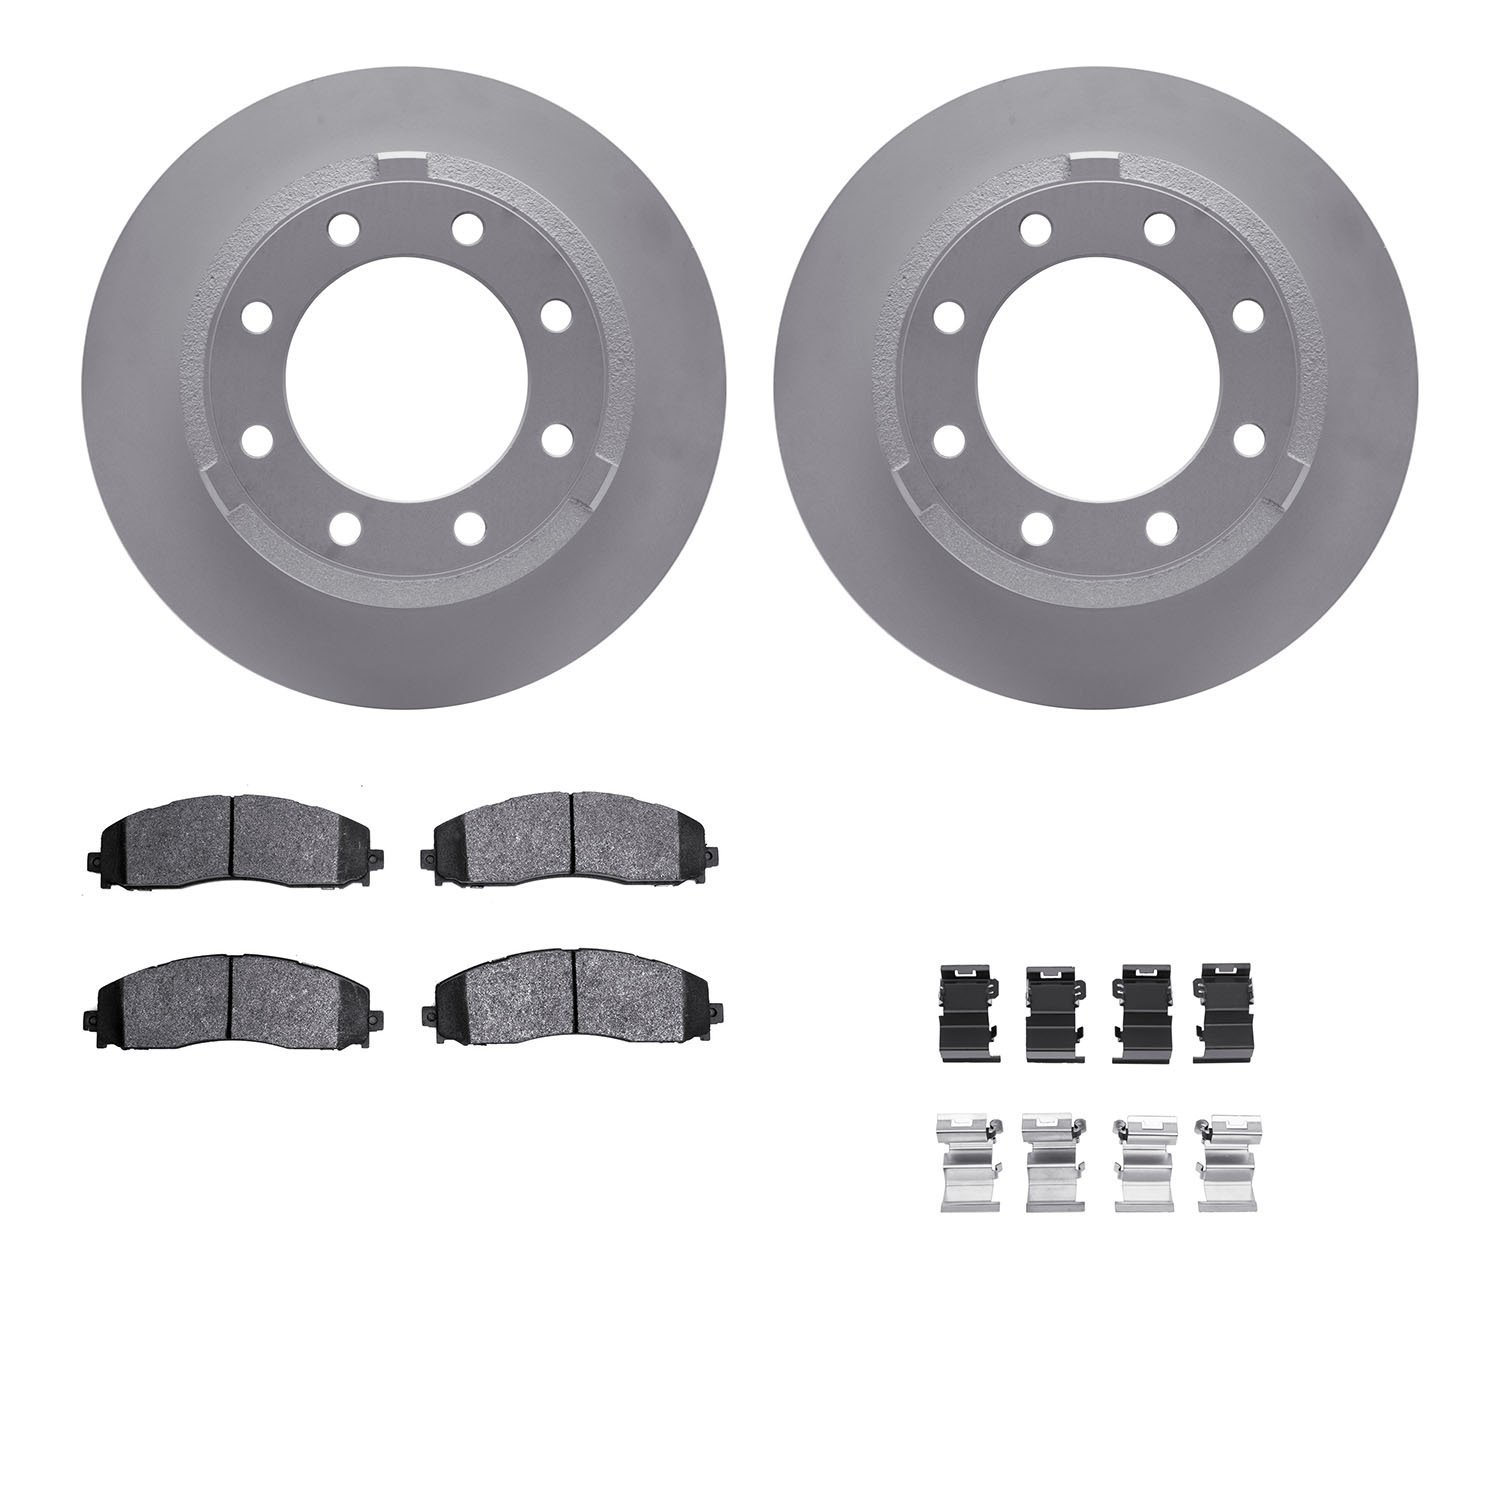 4412-54075 Geospec Brake Rotors with Ultimate-Duty Brake Pads & Hardware, Fits Select Ford/Lincoln/Mercury/Mazda, Position: Rear